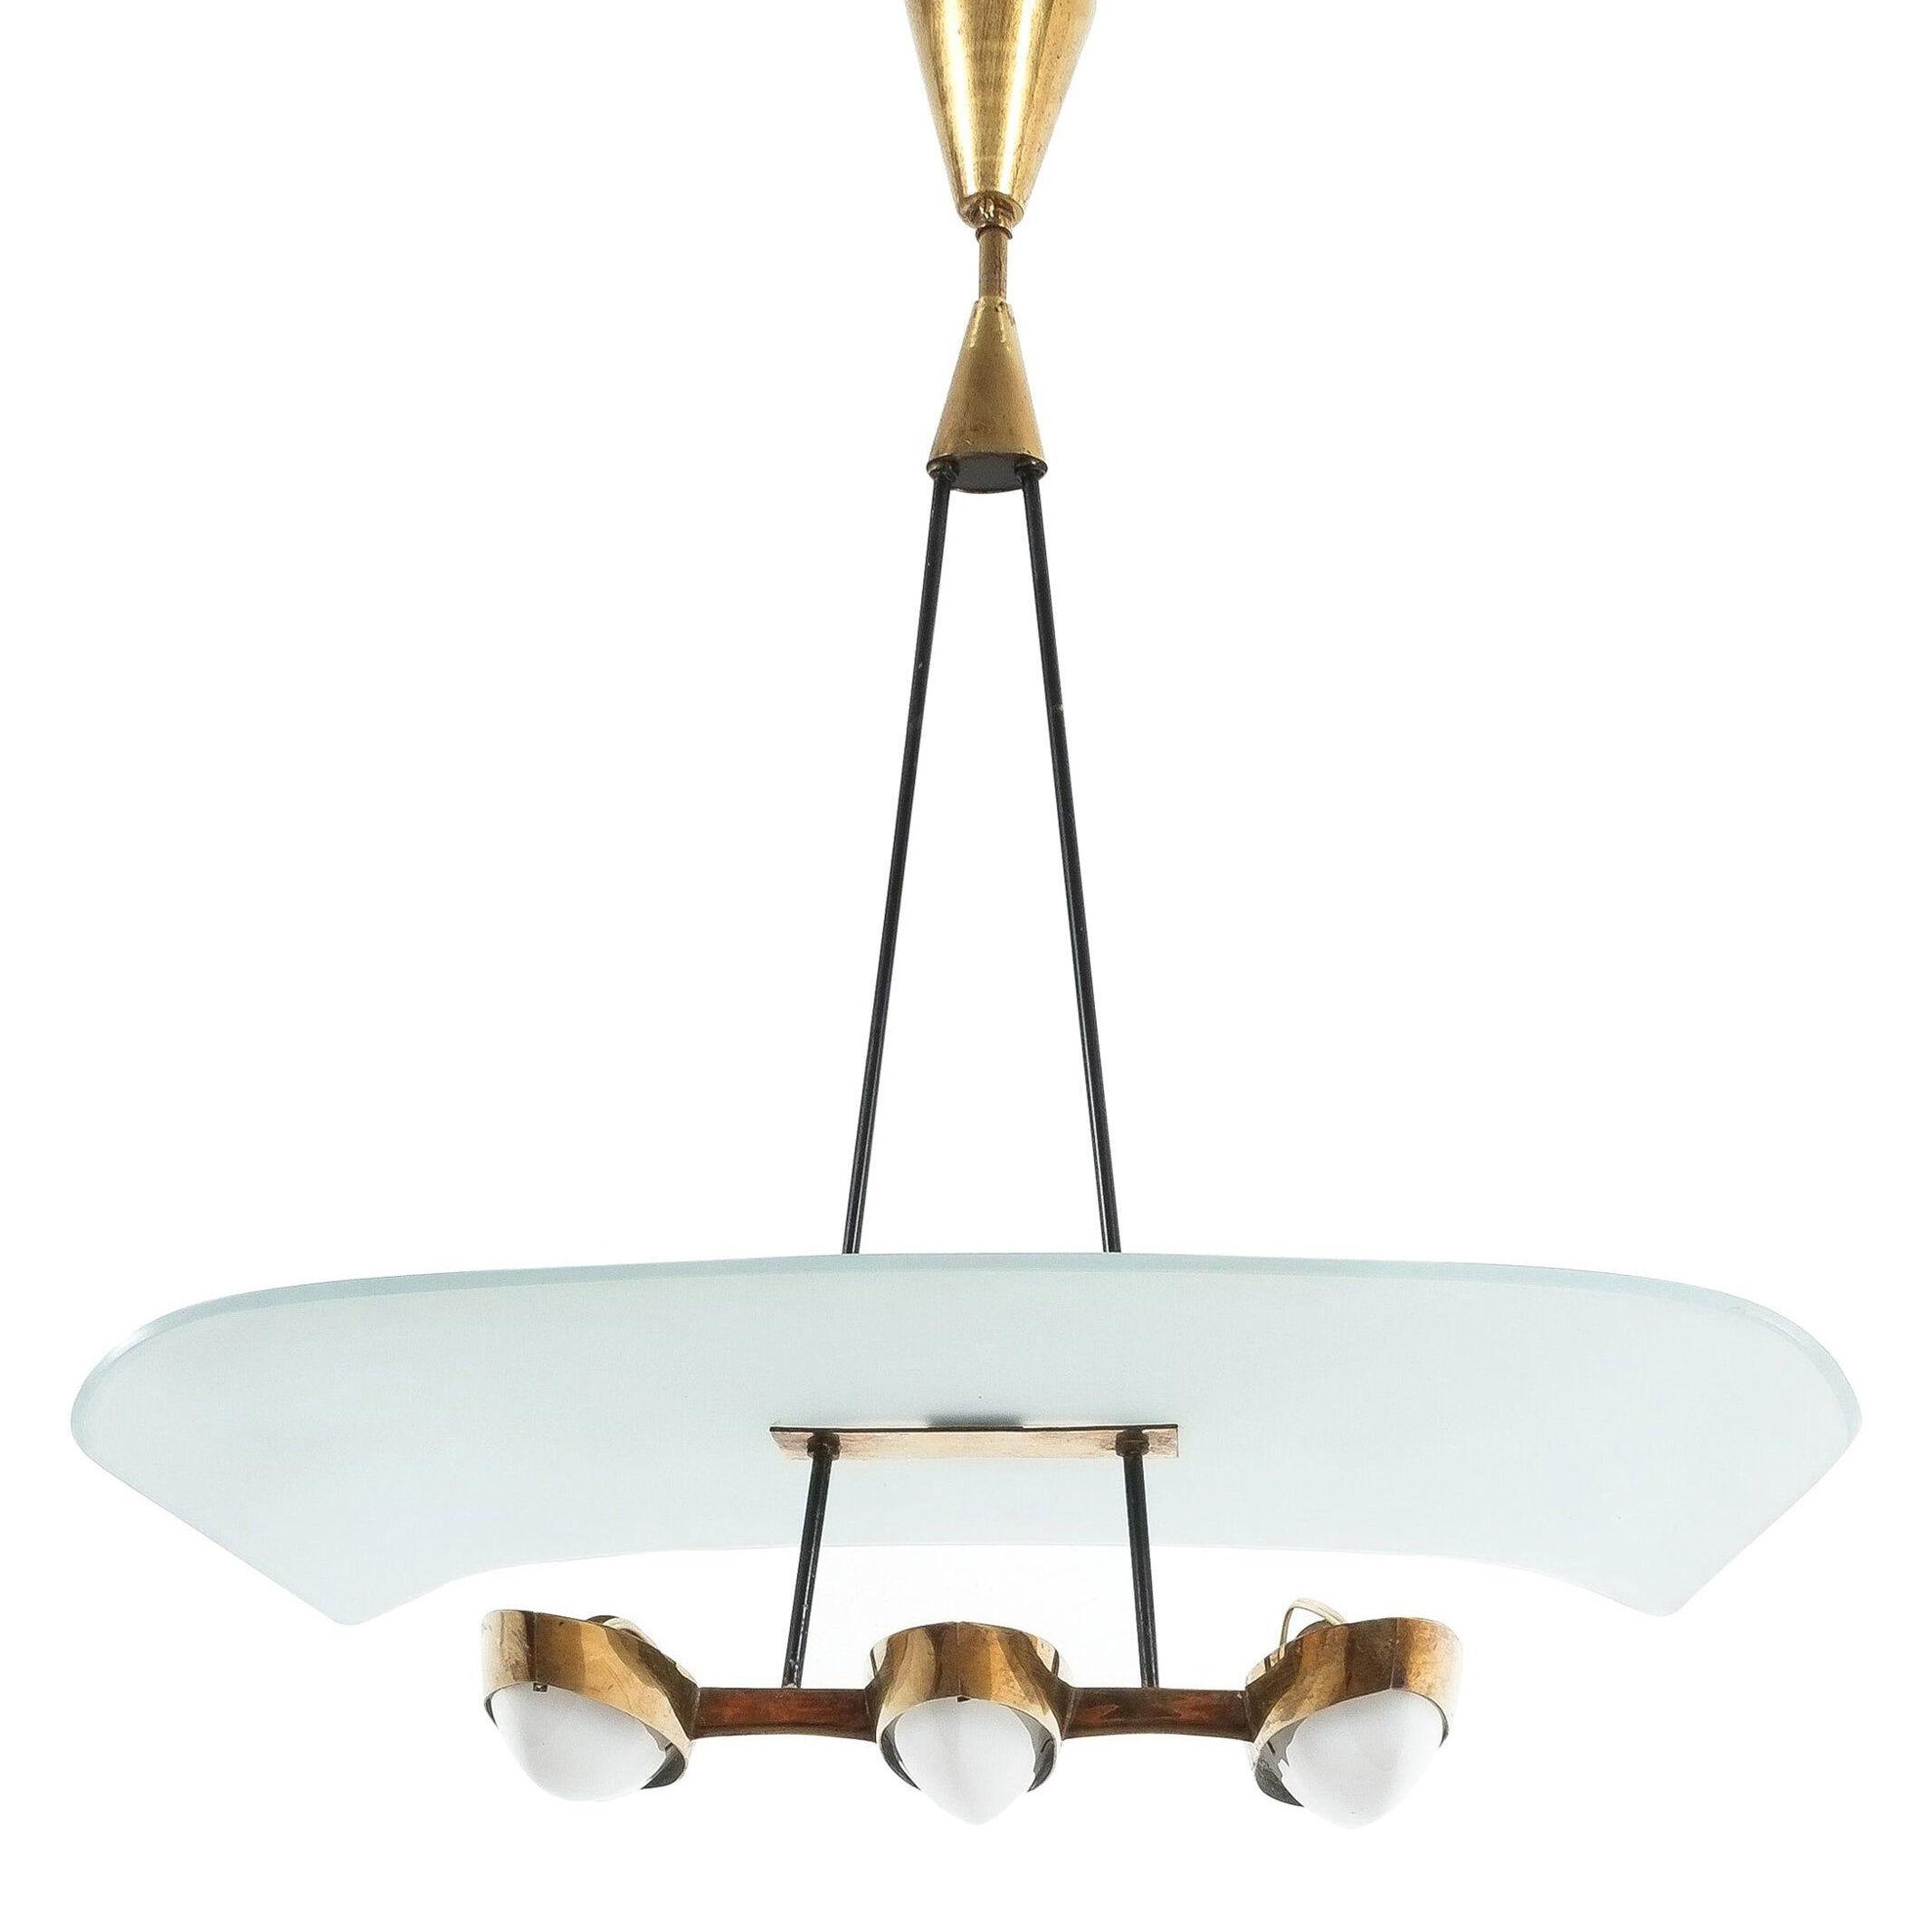 Chandelier from Frosted Glass and Brass Attributed to Stilnovo Italy, circa 1954